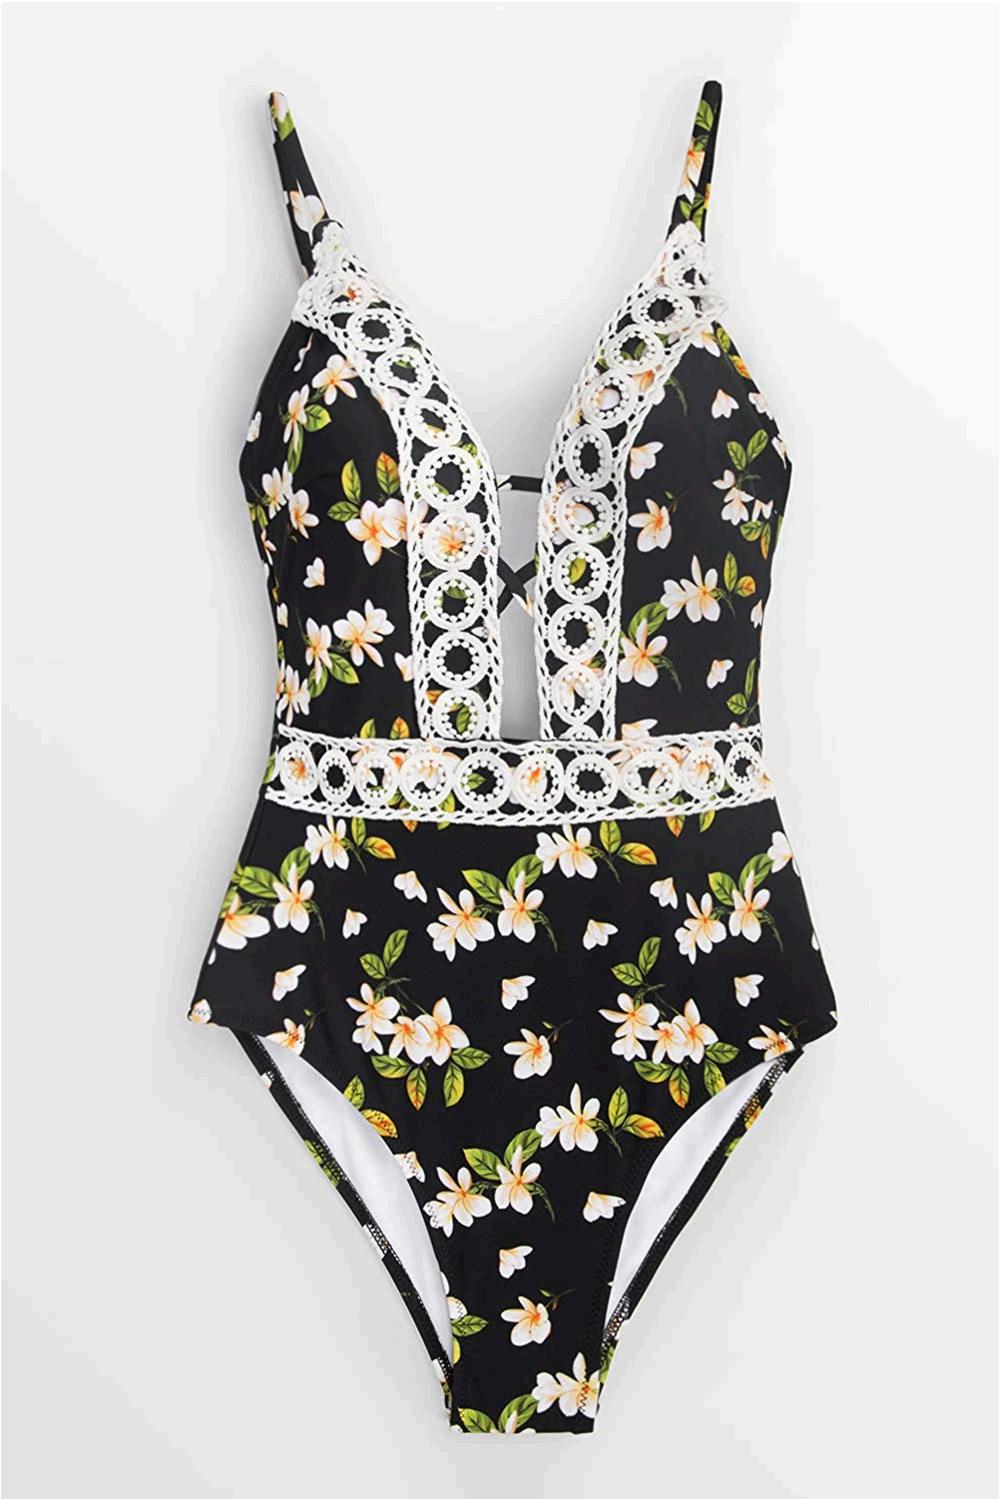 CUPSHE Women's Floral Halter One Piece Swimsuit with, Multi-color, Size ...